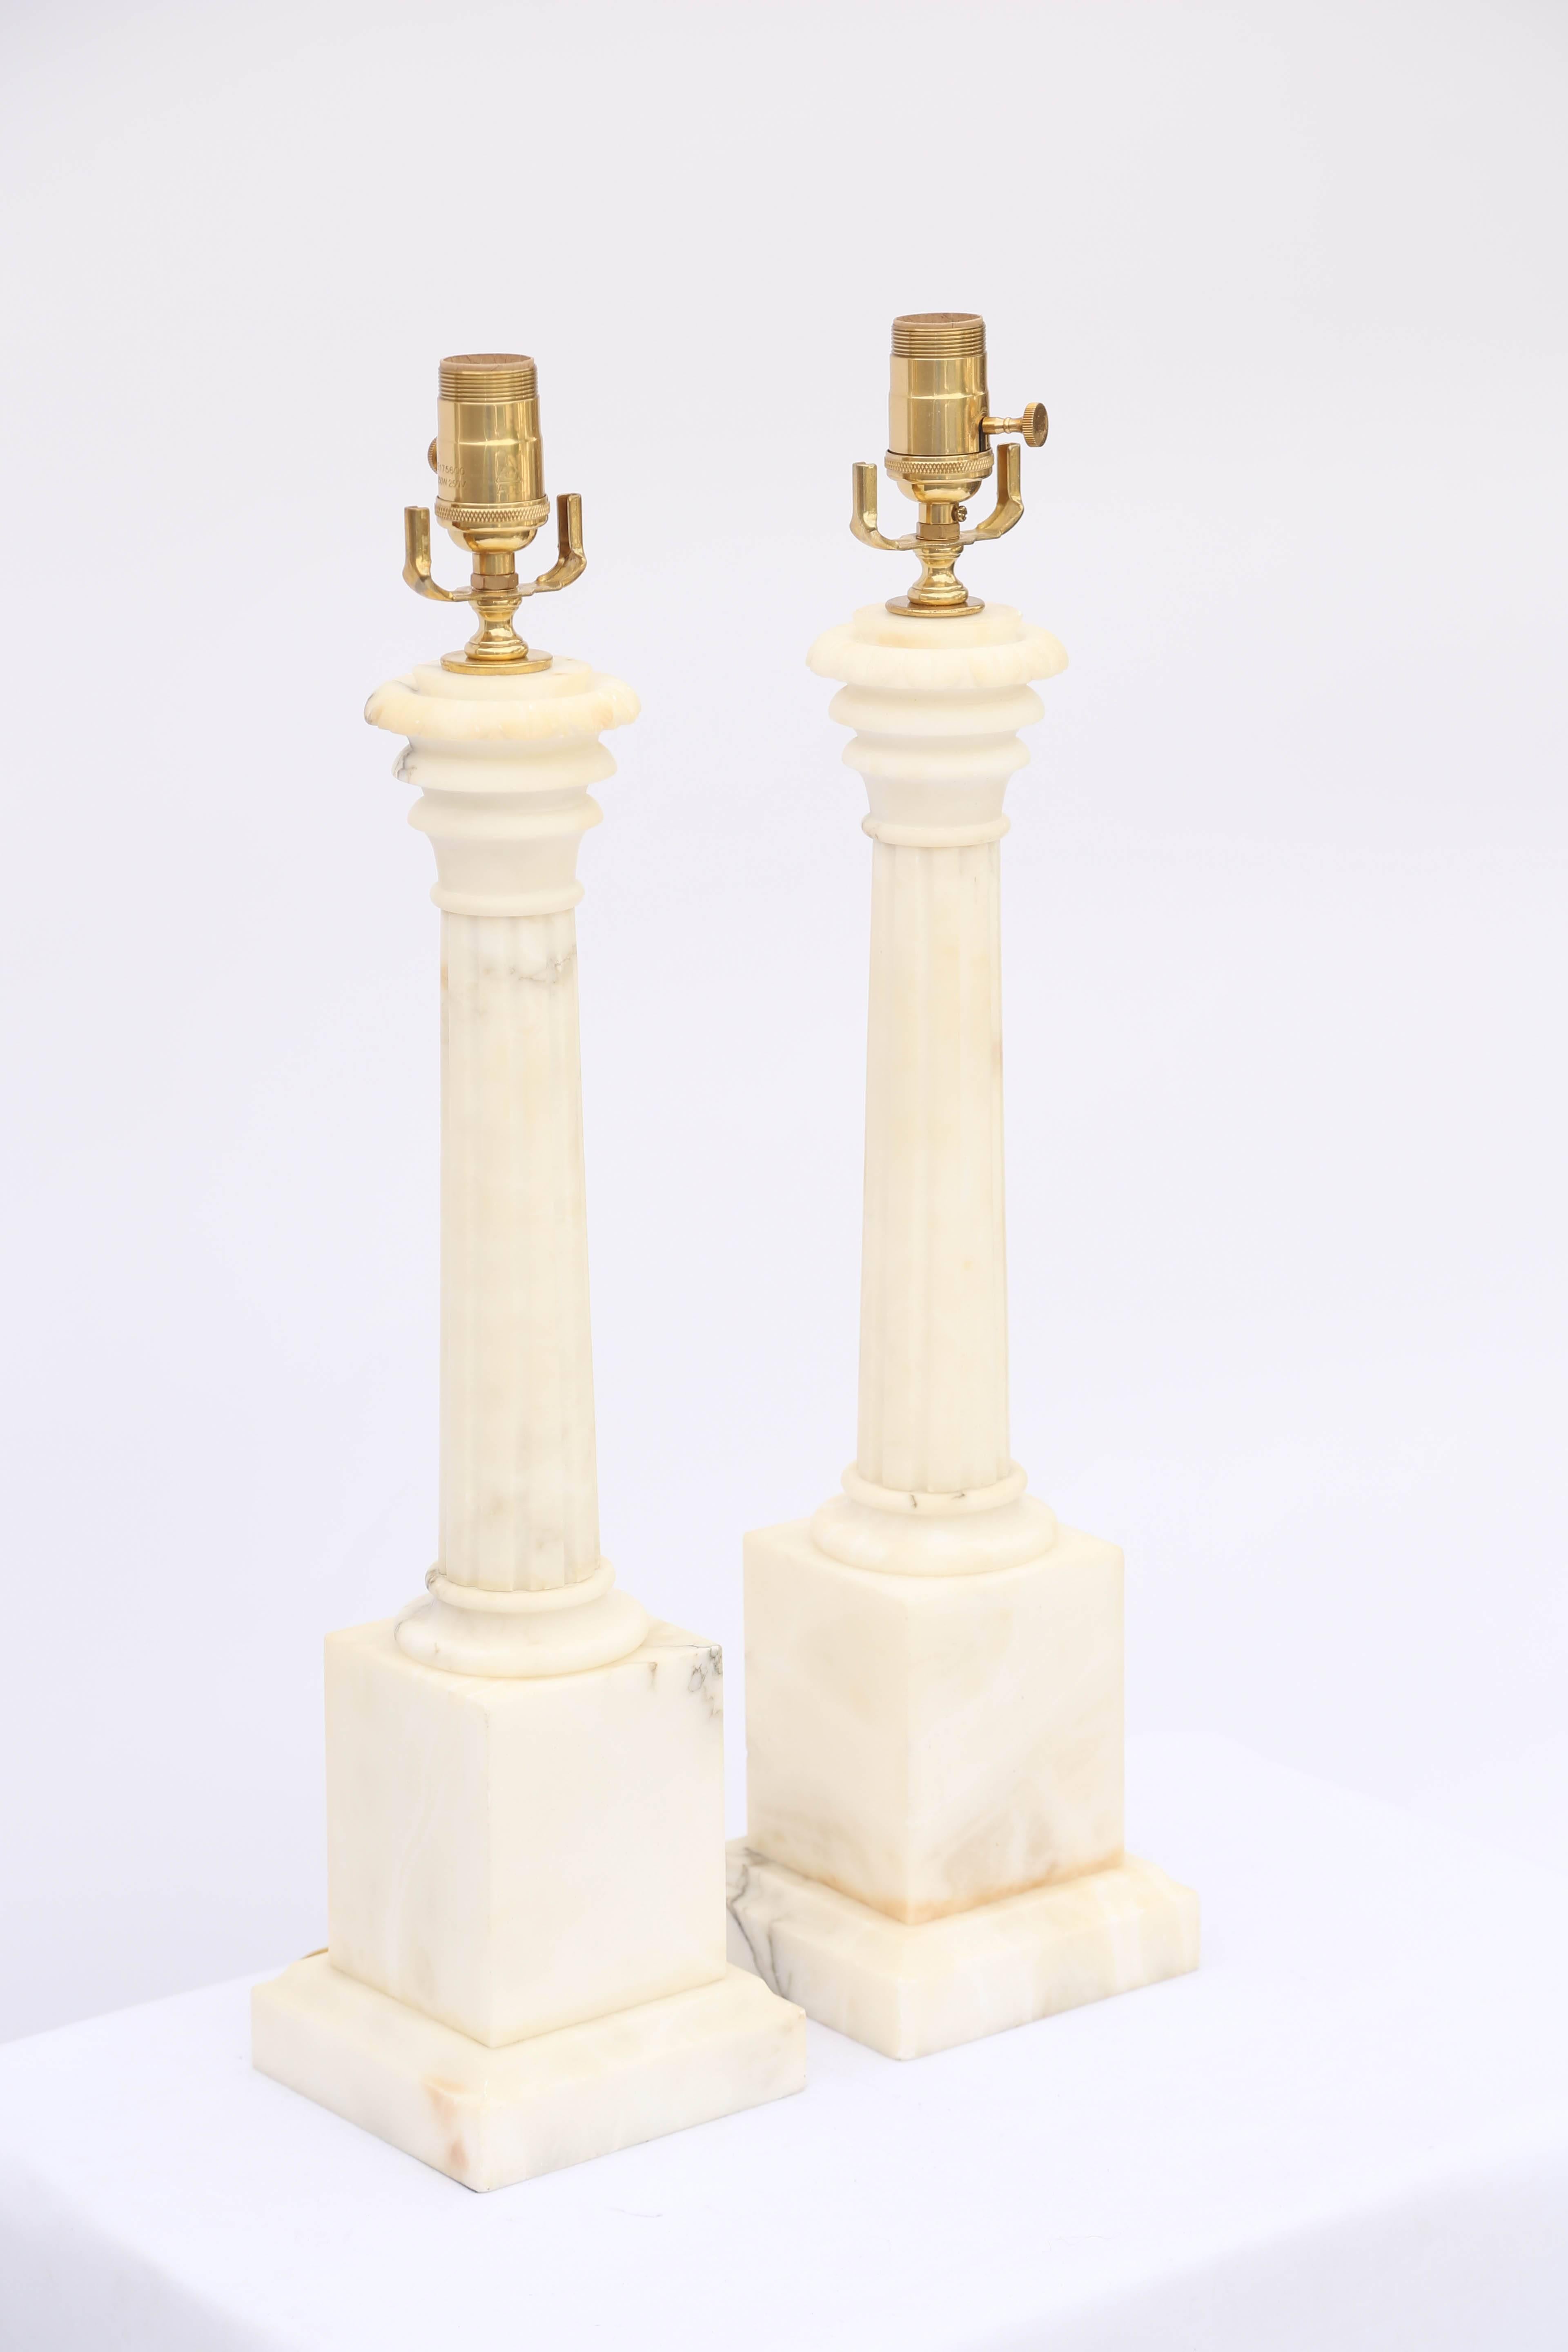 Pair of lamps, of carved alabaster, each a fluted column, on graduated, square plinth. 

Stock ID: D2846.